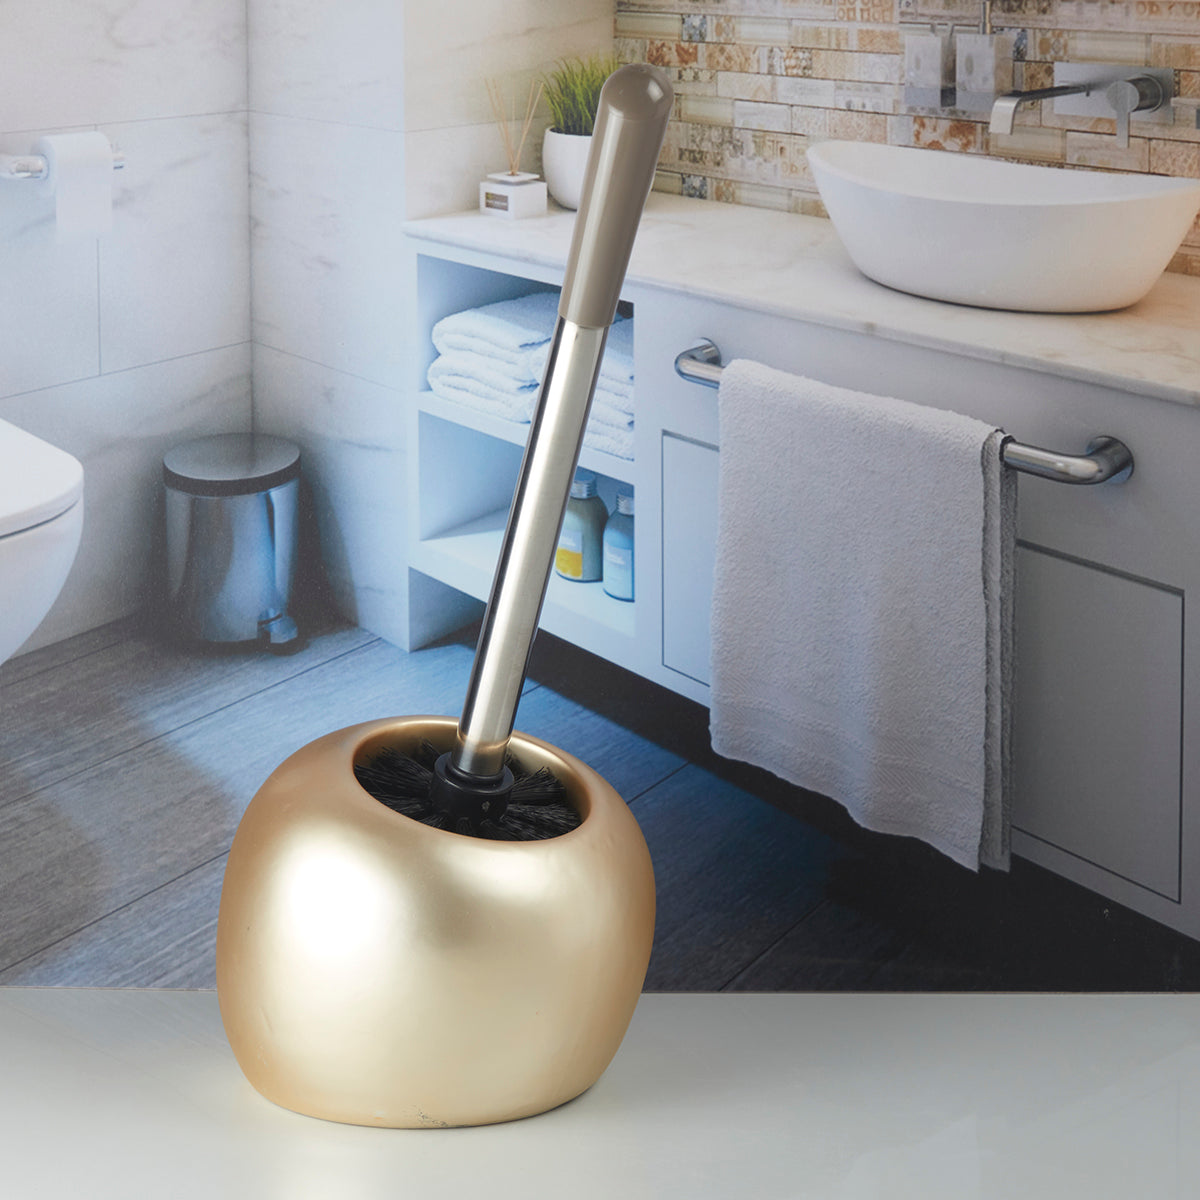 Kookee Ceramic Toilet Cleaner Brush with Holder Stand for Bathroom, Commode, Washroom, Toilet Cleaning Brush, Gold (10221)